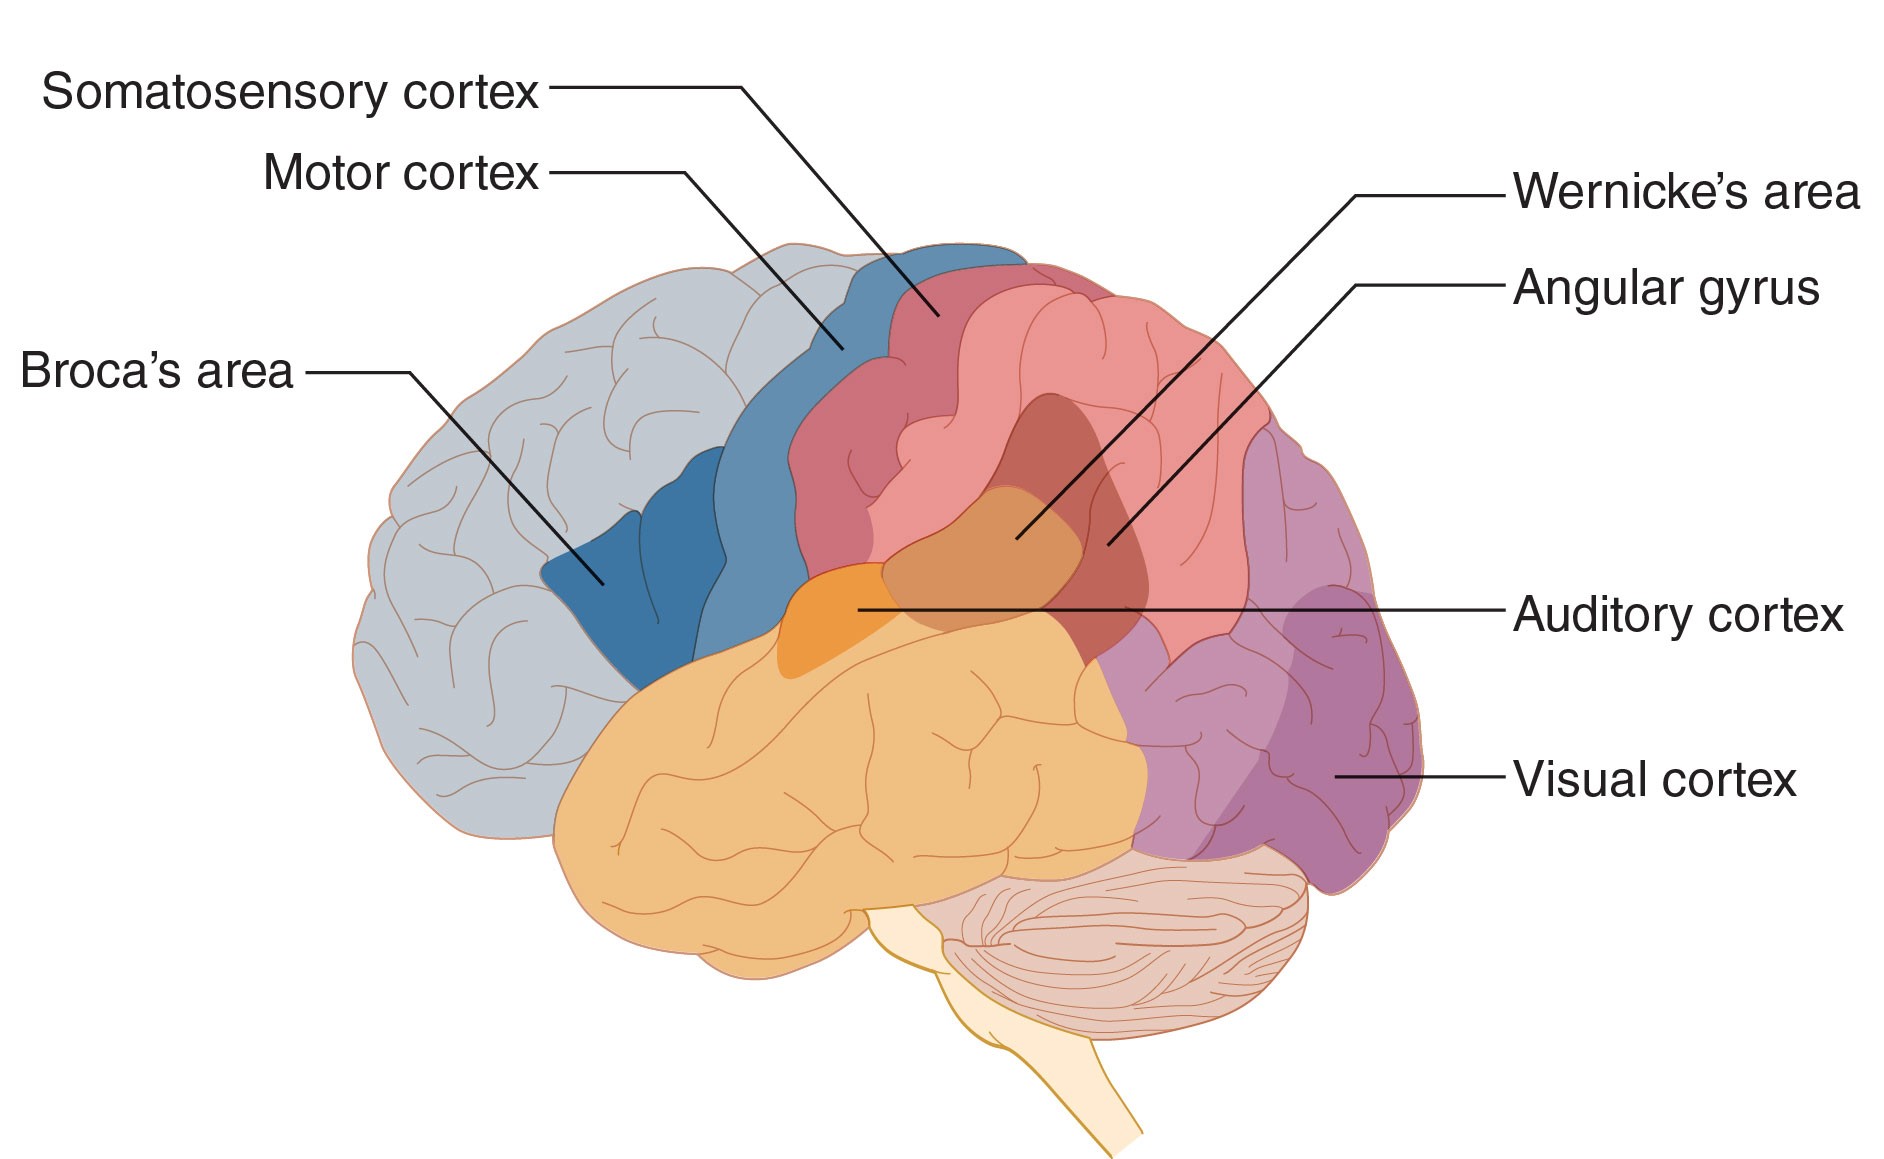 The figure is a side view of the brain with the four lobes labeled.  The frontal lobe is located in the front of the brain, behind the forehead and eyes, up to the midpoint on the top of the head.  The parietal lobe is located on the top of the brain from the midpoint behind the frontal lobe to where the head starts to slope down in the back.  The temporal lobe is located under the parietal lobe where the ears are located on the side of the head. The occipital lobe is located in the back of the head, under the parietal lobe and behind the temporal lobe. The Broca's area is located in the back of the frontal lobe, above the temporal lobe.  The Wernicke's area is located at the top of the temporal lobe, under the parietal lobe.  The Angular gyrus is located in the parietal lobe, behind the temporal lobe.